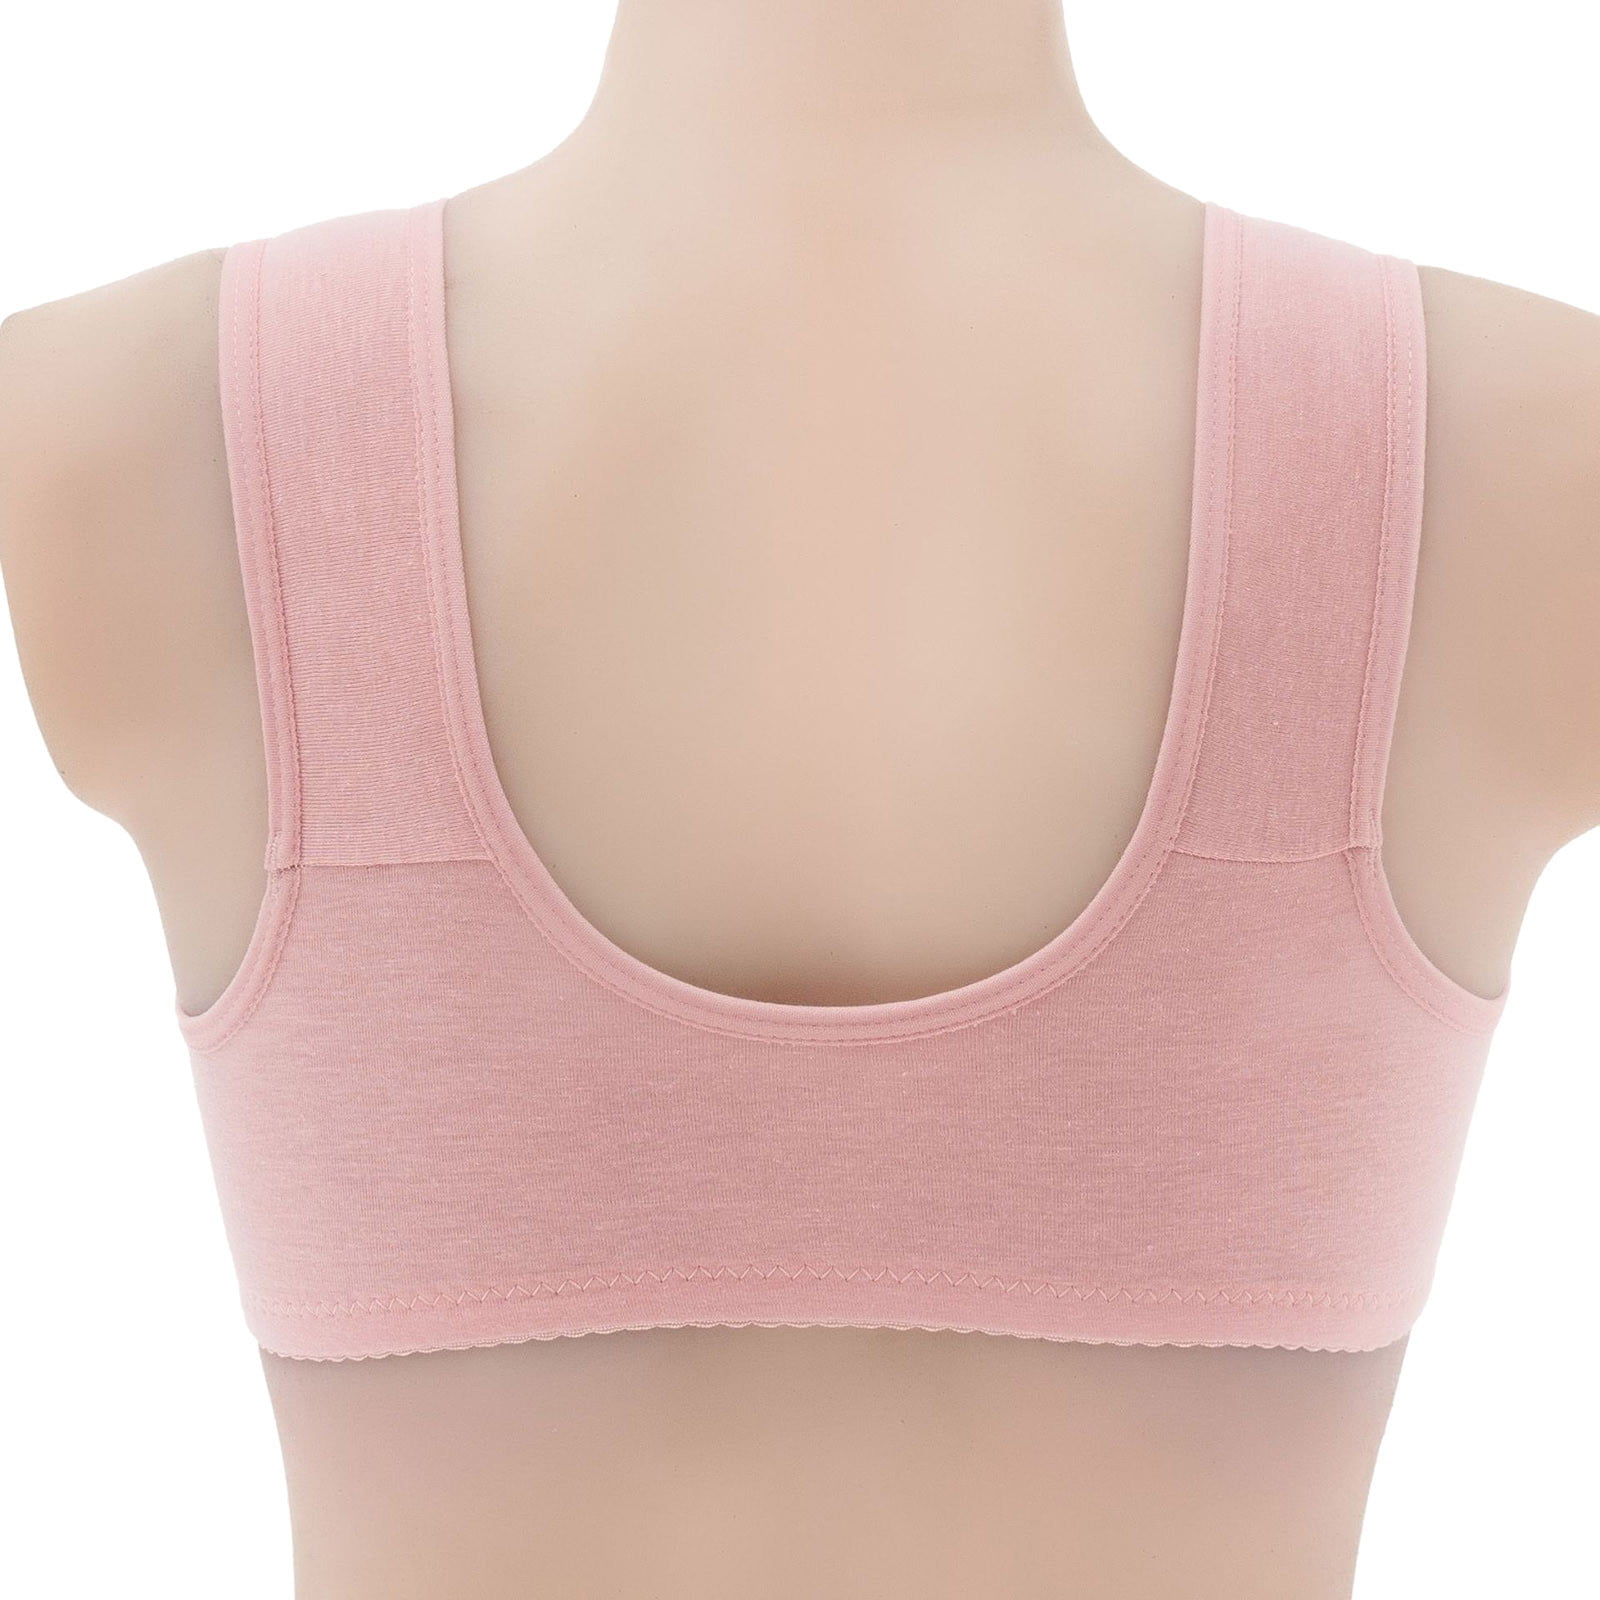 Elbourn 1Pack Sports Bra Front Closure Women Sports Bra Full Cup Cotton  Running Bra for Plus Size （Pink-M） 